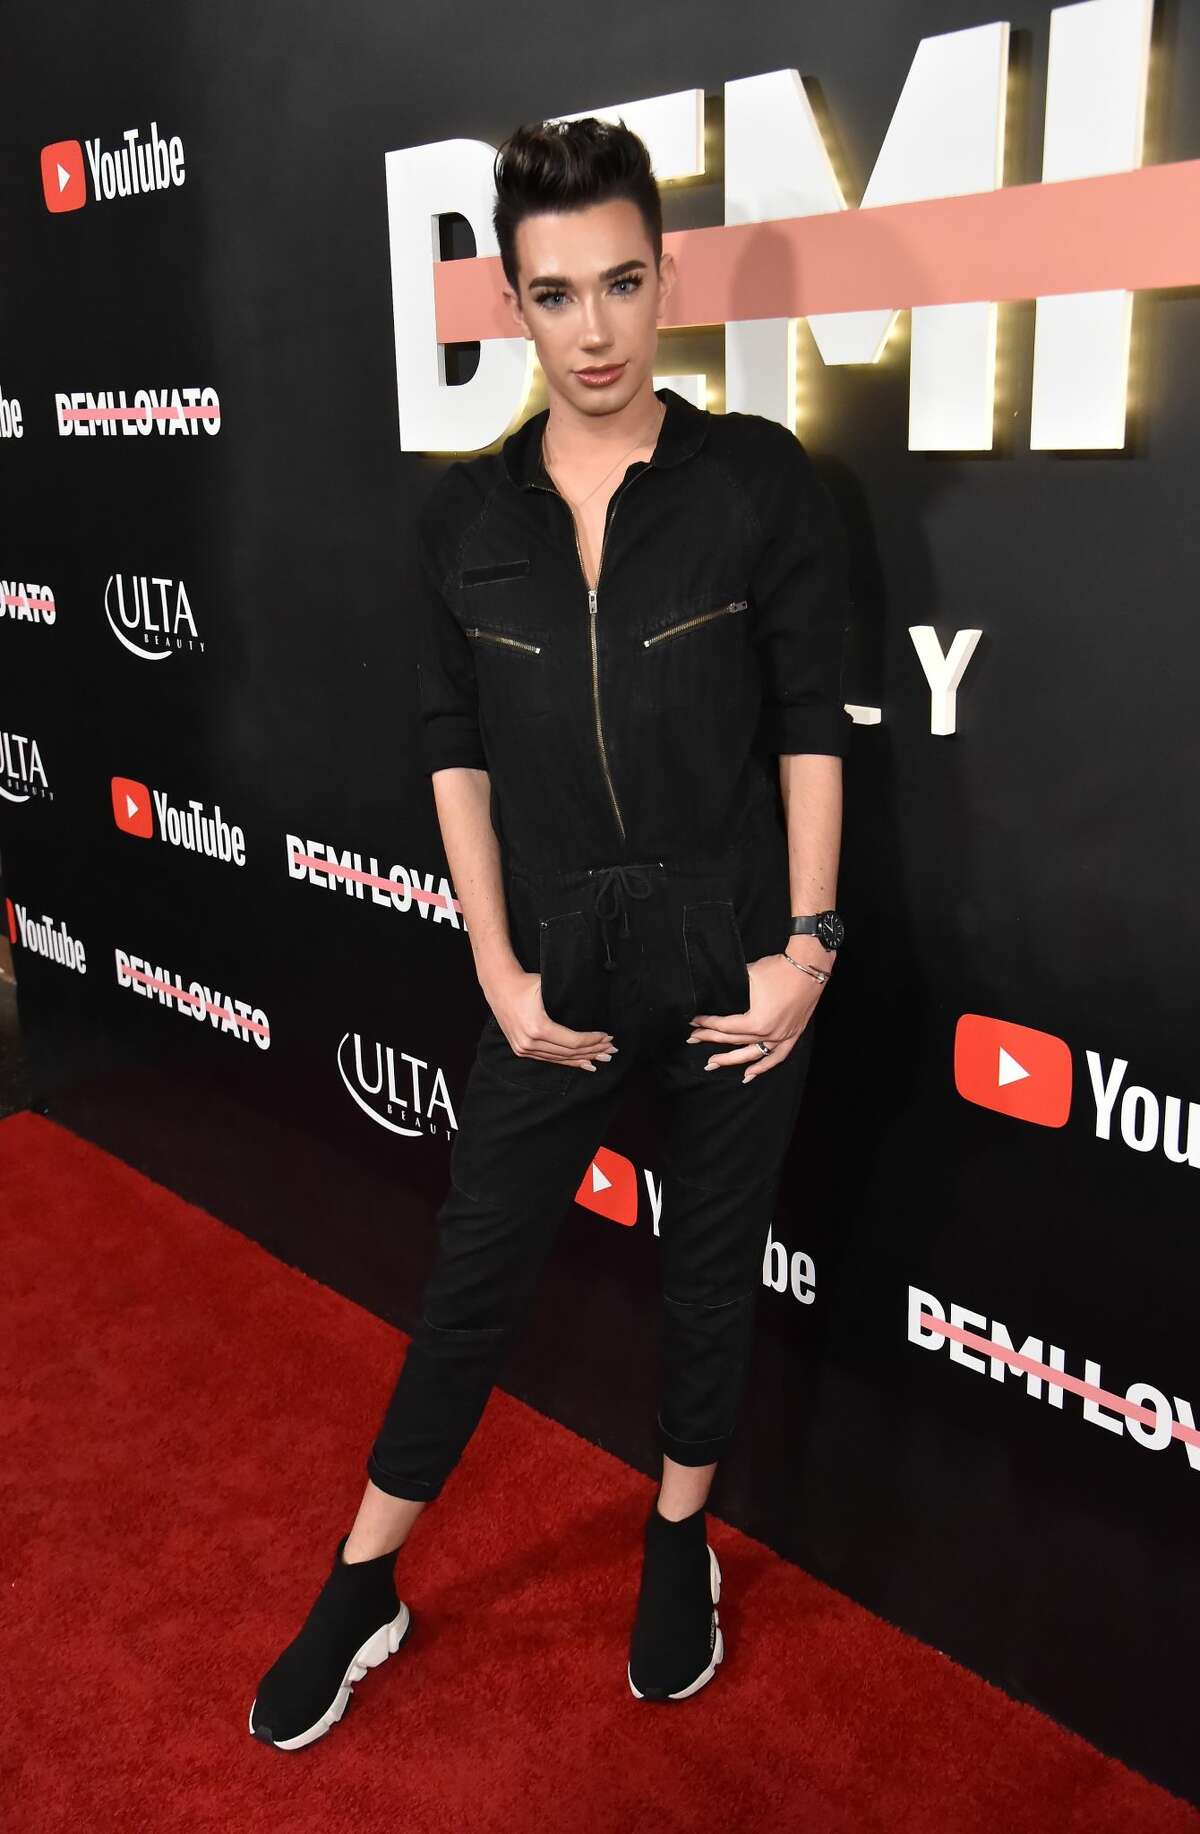 LOS ANGELES, CA - OCTOBER 11: James Charles attends the "Demi Lovato: Simply Complicated" YouTube premiere at The Fonda Theatre on October 11, 2017 in Los Angeles, California. (Photo by Jeff Kravitz/FilmMagic for YouTube)